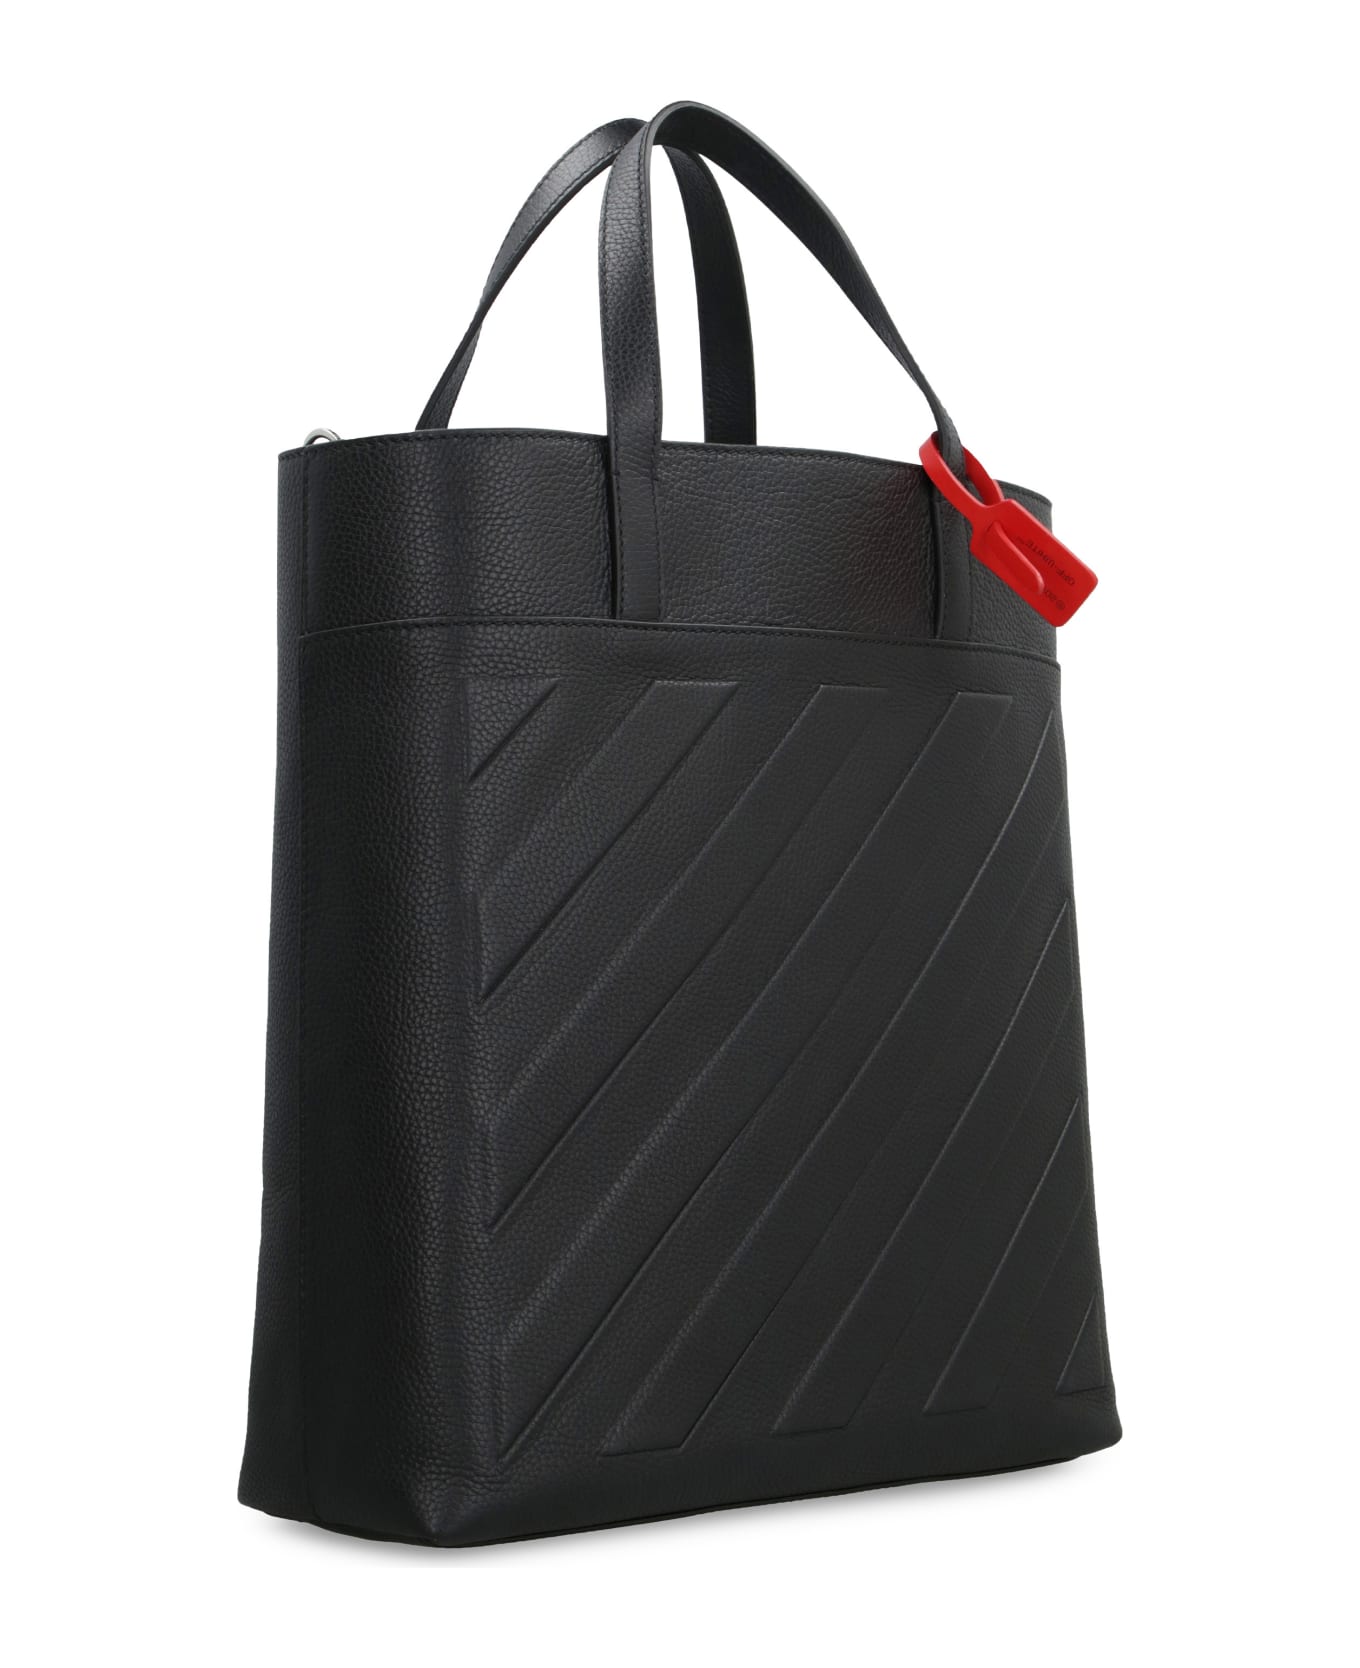 Off-White Binder Leather Tote - black トートバッグ